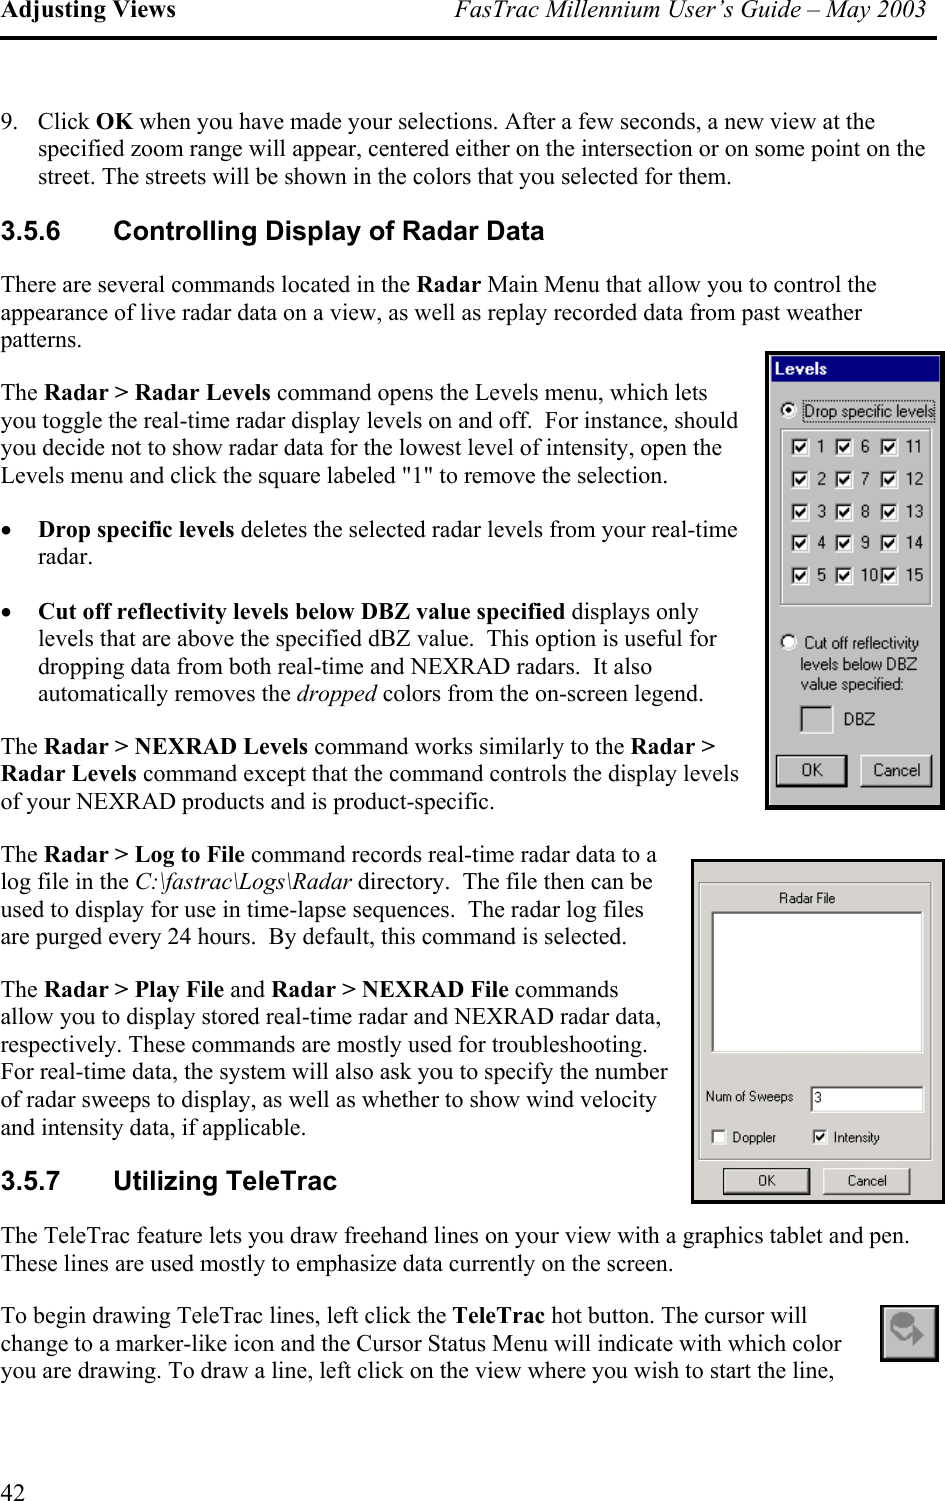 Adjusting Views  FasTrac Millennium User’s Guide – May 2003 9. Click OK when you have made your selections. After a few seconds, a new view at the specified zoom range will appear, centered either on the intersection or on some point on the street. The streets will be shown in the colors that you selected for them. 3.5.6  Controlling Display of Radar Data There are several commands located in the Radar Main Menu that allow you to control the appearance of live radar data on a view, as well as replay recorded data from past weather patterns. The Radar &gt; Radar Levels command opens the Levels menu, which lets you toggle the real-time radar display levels on and off.  For instance, should you decide not to show radar data for the lowest level of intensity, open the Levels menu and click the square labeled &quot;1&quot; to remove the selection. •  Drop specific levels deletes the selected radar levels from your real-time radar. •  Cut off reflectivity levels below DBZ value specified displays only levels that are above the specified dBZ value.  This option is useful for dropping data from both real-time and NEXRAD radars.  It also automatically removes the dropped colors from the on-screen legend. The Radar &gt; NEXRAD Levels command works similarly to the Radar &gt; Radar Levels command except that the command controls the display levels of your NEXRAD products and is product-specific. The Radar &gt; Log to File command records real-time radar data to a log file in the C:\fastrac\Logs\Radar directory.  The file then can be used to display for use in time-lapse sequences.  The radar log files are purged every 24 hours.  By default, this command is selected. The Radar &gt; Play File and Radar &gt; NEXRAD File commands allow you to display stored real-time radar and NEXRAD radar data, respectively. These commands are mostly used for troubleshooting. For real-time data, the system will also ask you to specify the number of radar sweeps to display, as well as whether to show wind velocity and intensity data, if applicable. 3.5.7 Utilizing TeleTrac The TeleTrac feature lets you draw freehand lines on your view with a graphics tablet and pen. These lines are used mostly to emphasize data currently on the screen. To begin drawing TeleTrac lines, left click the TeleTrac hot button. The cursor will change to a marker-like icon and the Cursor Status Menu will indicate with which color you are drawing. To draw a line, left click on the view where you wish to start the line, 42 